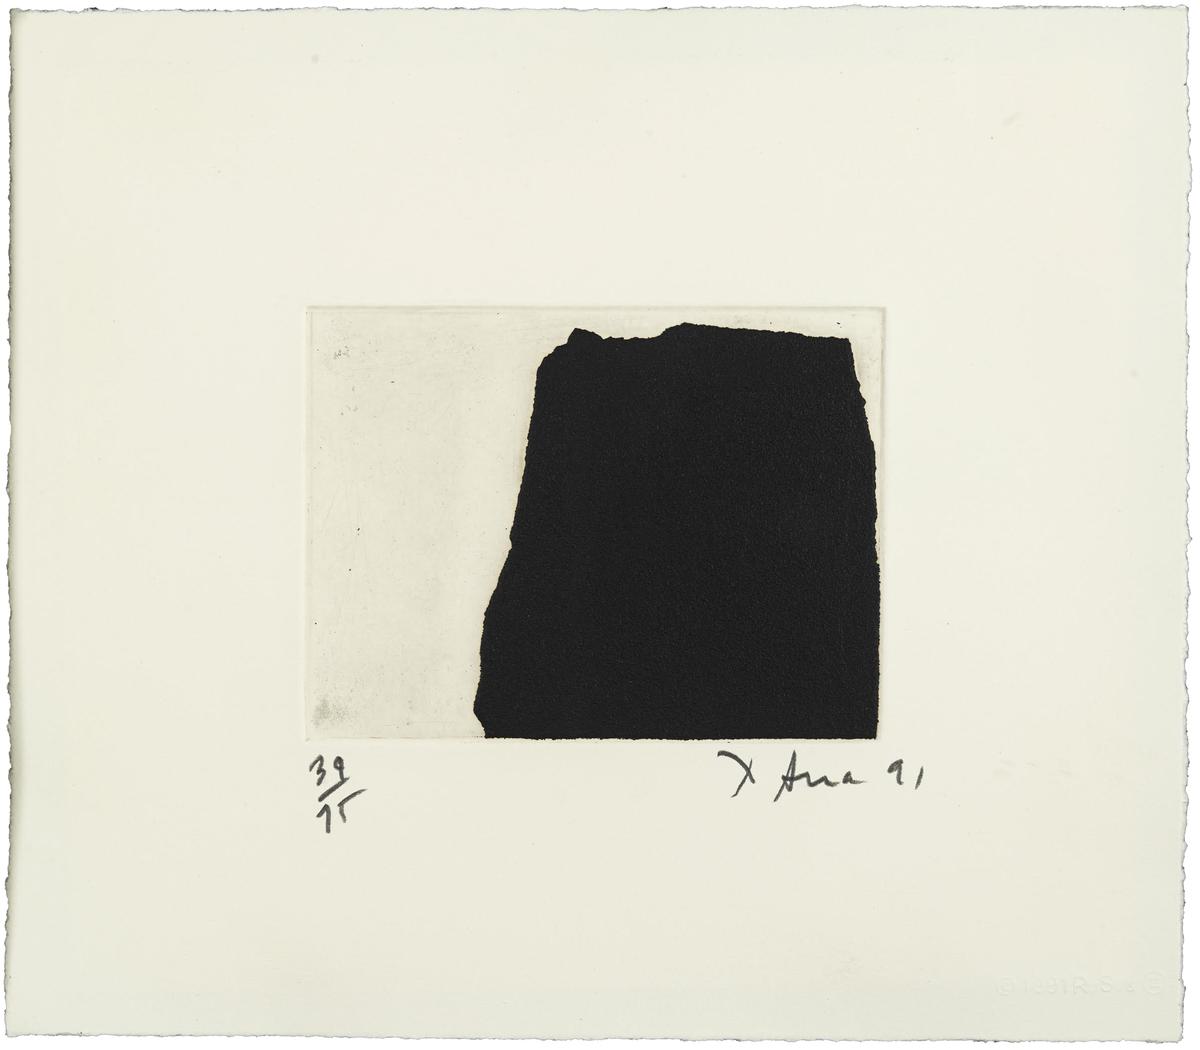 Richard Serra Viday Afanger 1 original etching on Hahnemüle paper from the edition of 75 signed numbered and dated by the artist for sale